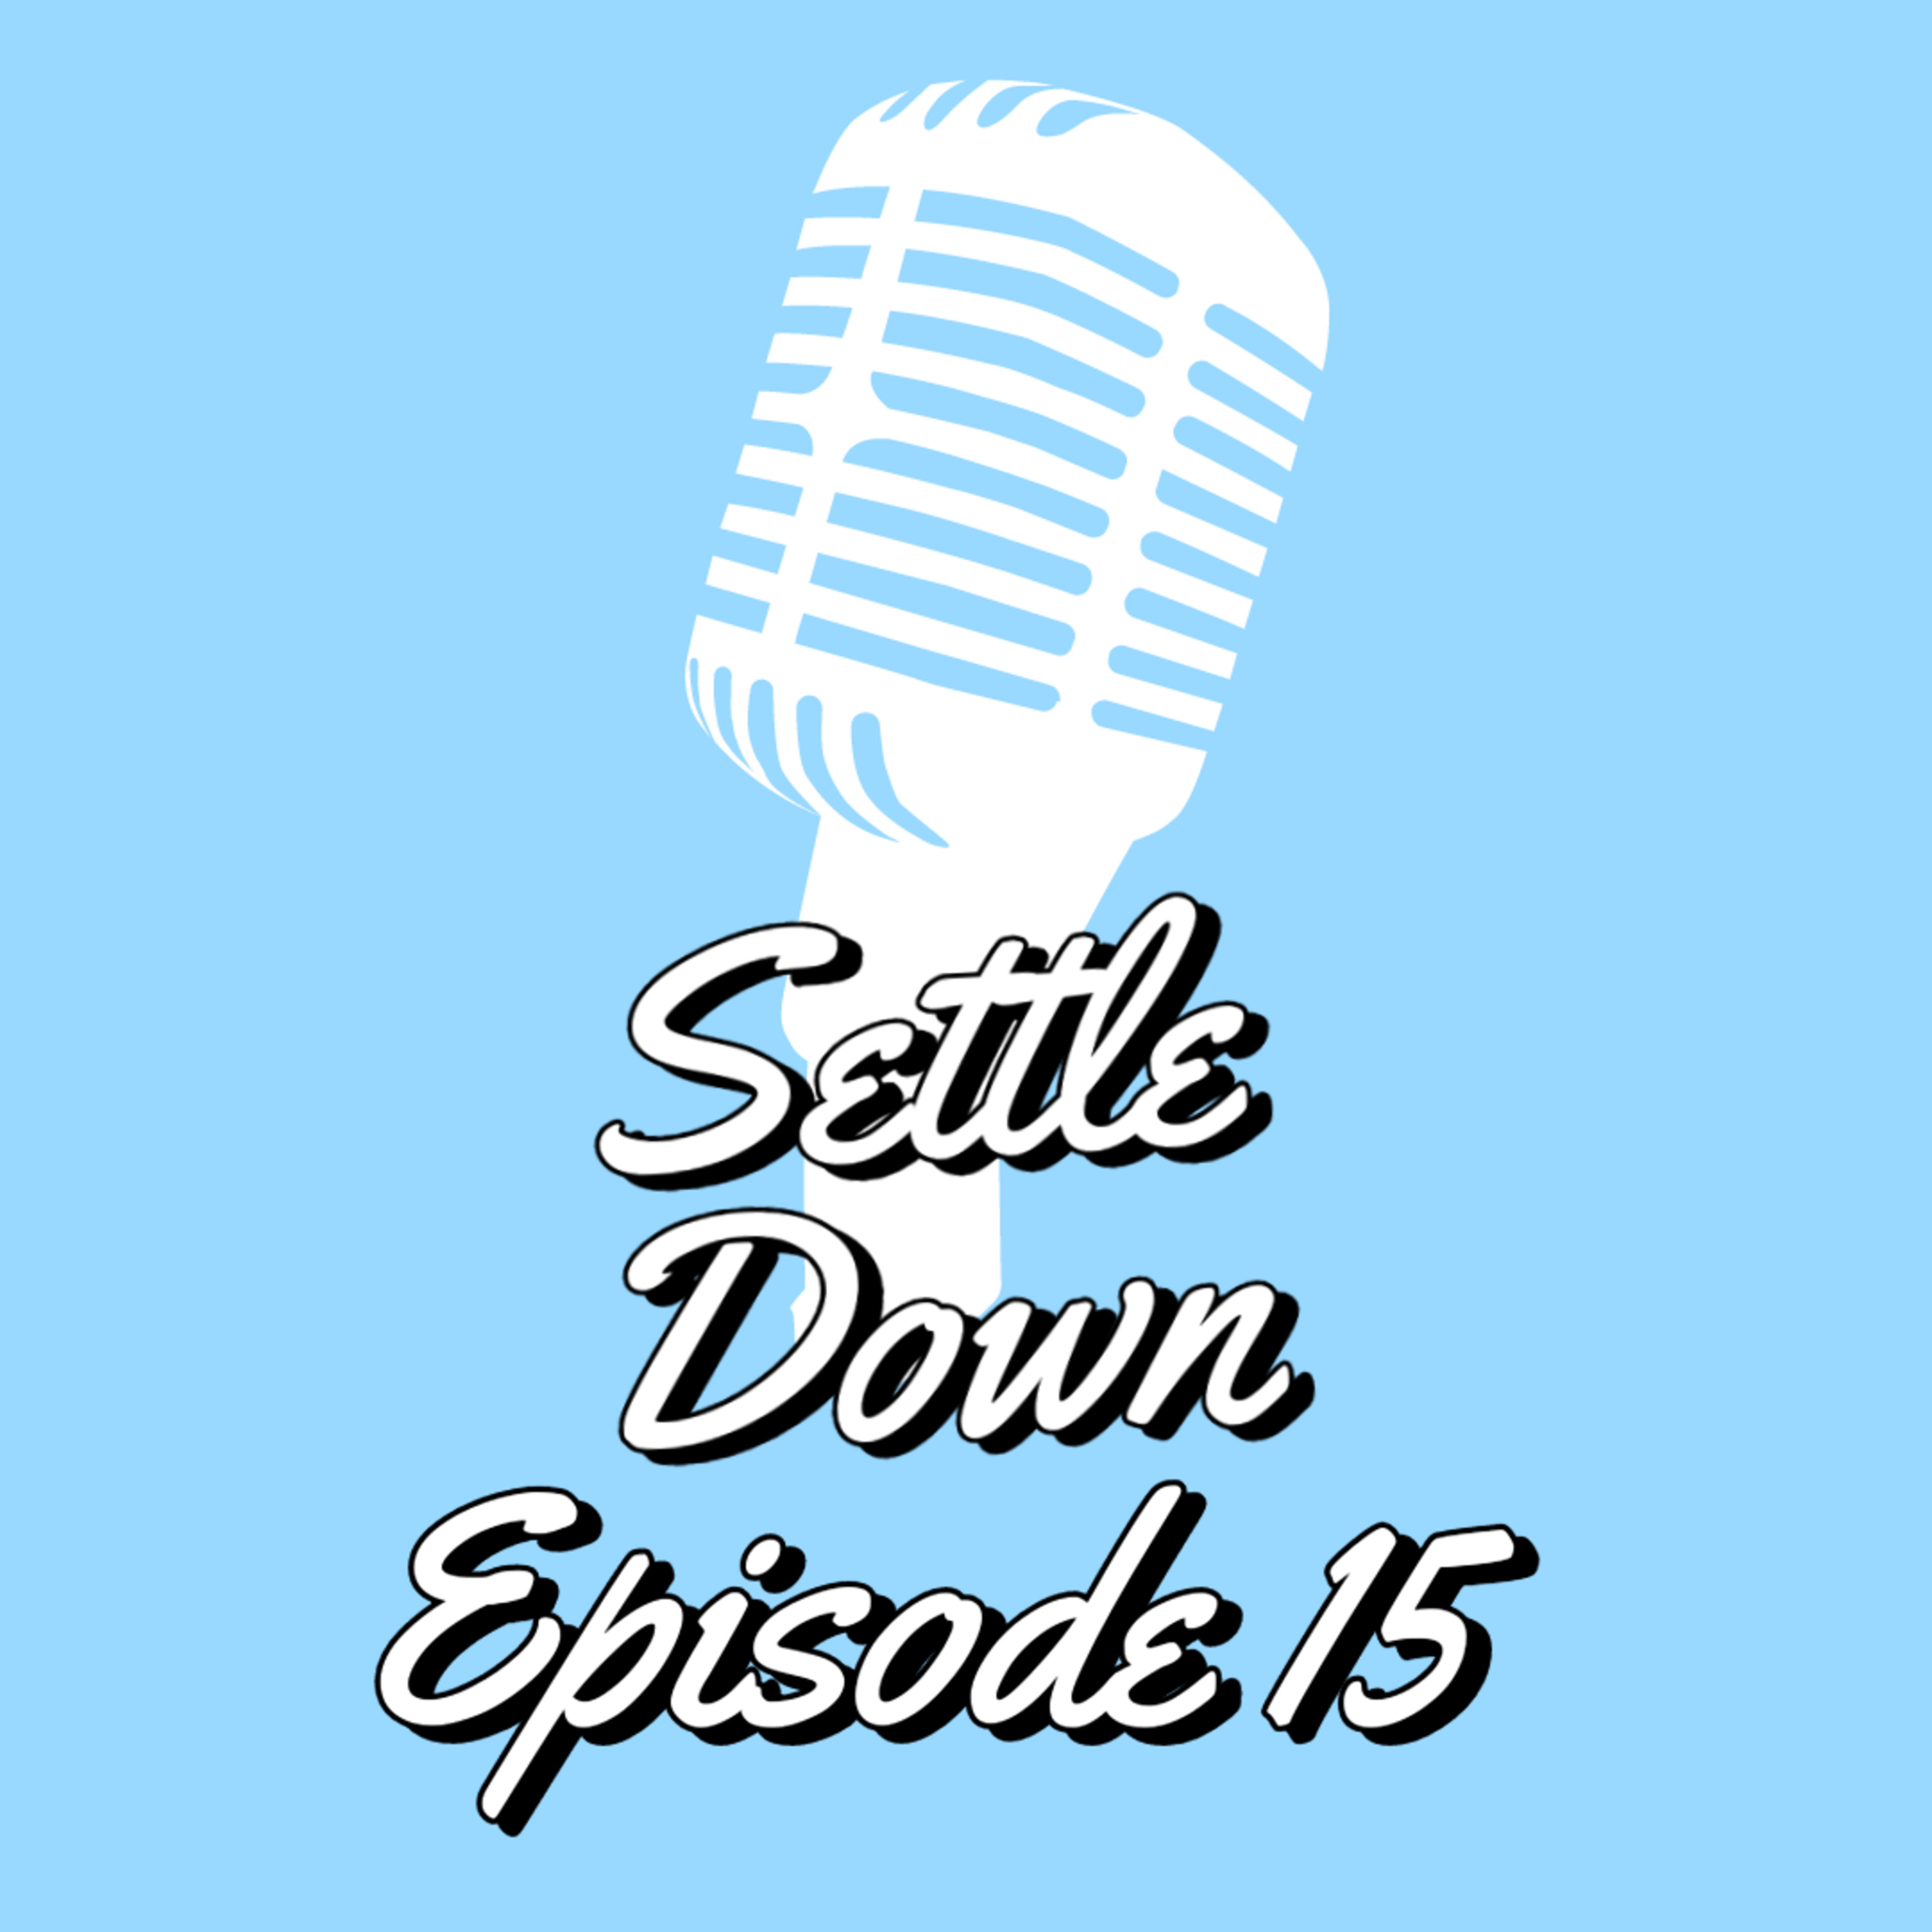 Settle Down Podcast Episode 15: Fast Food Tiers